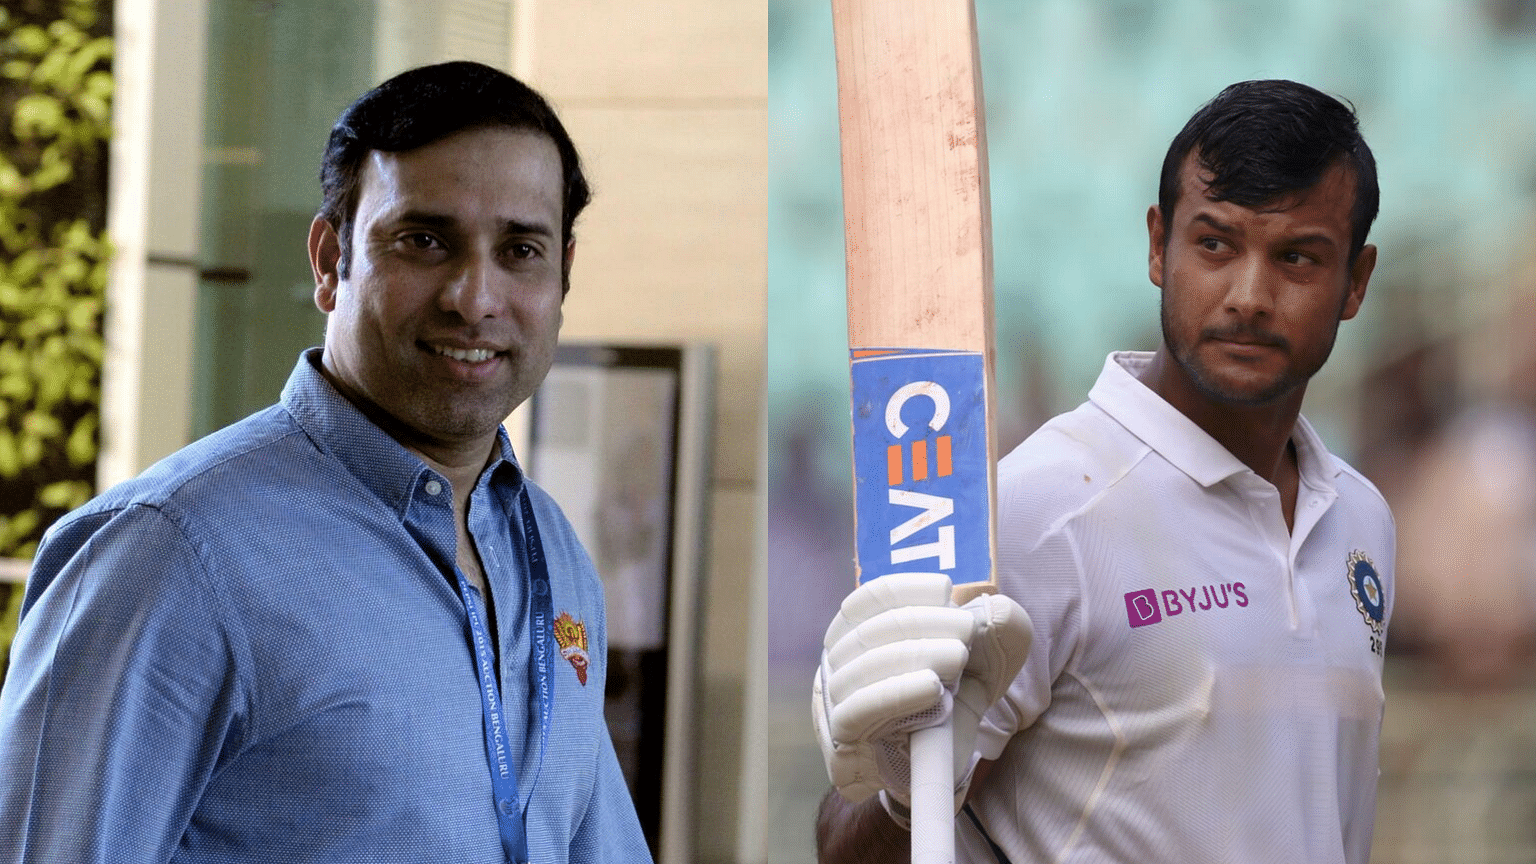 Former India great VVS Laxman feels Mayank Agarwal’s “fearless” approach in batting resembles a lot with the maverick Virender Sehwag.